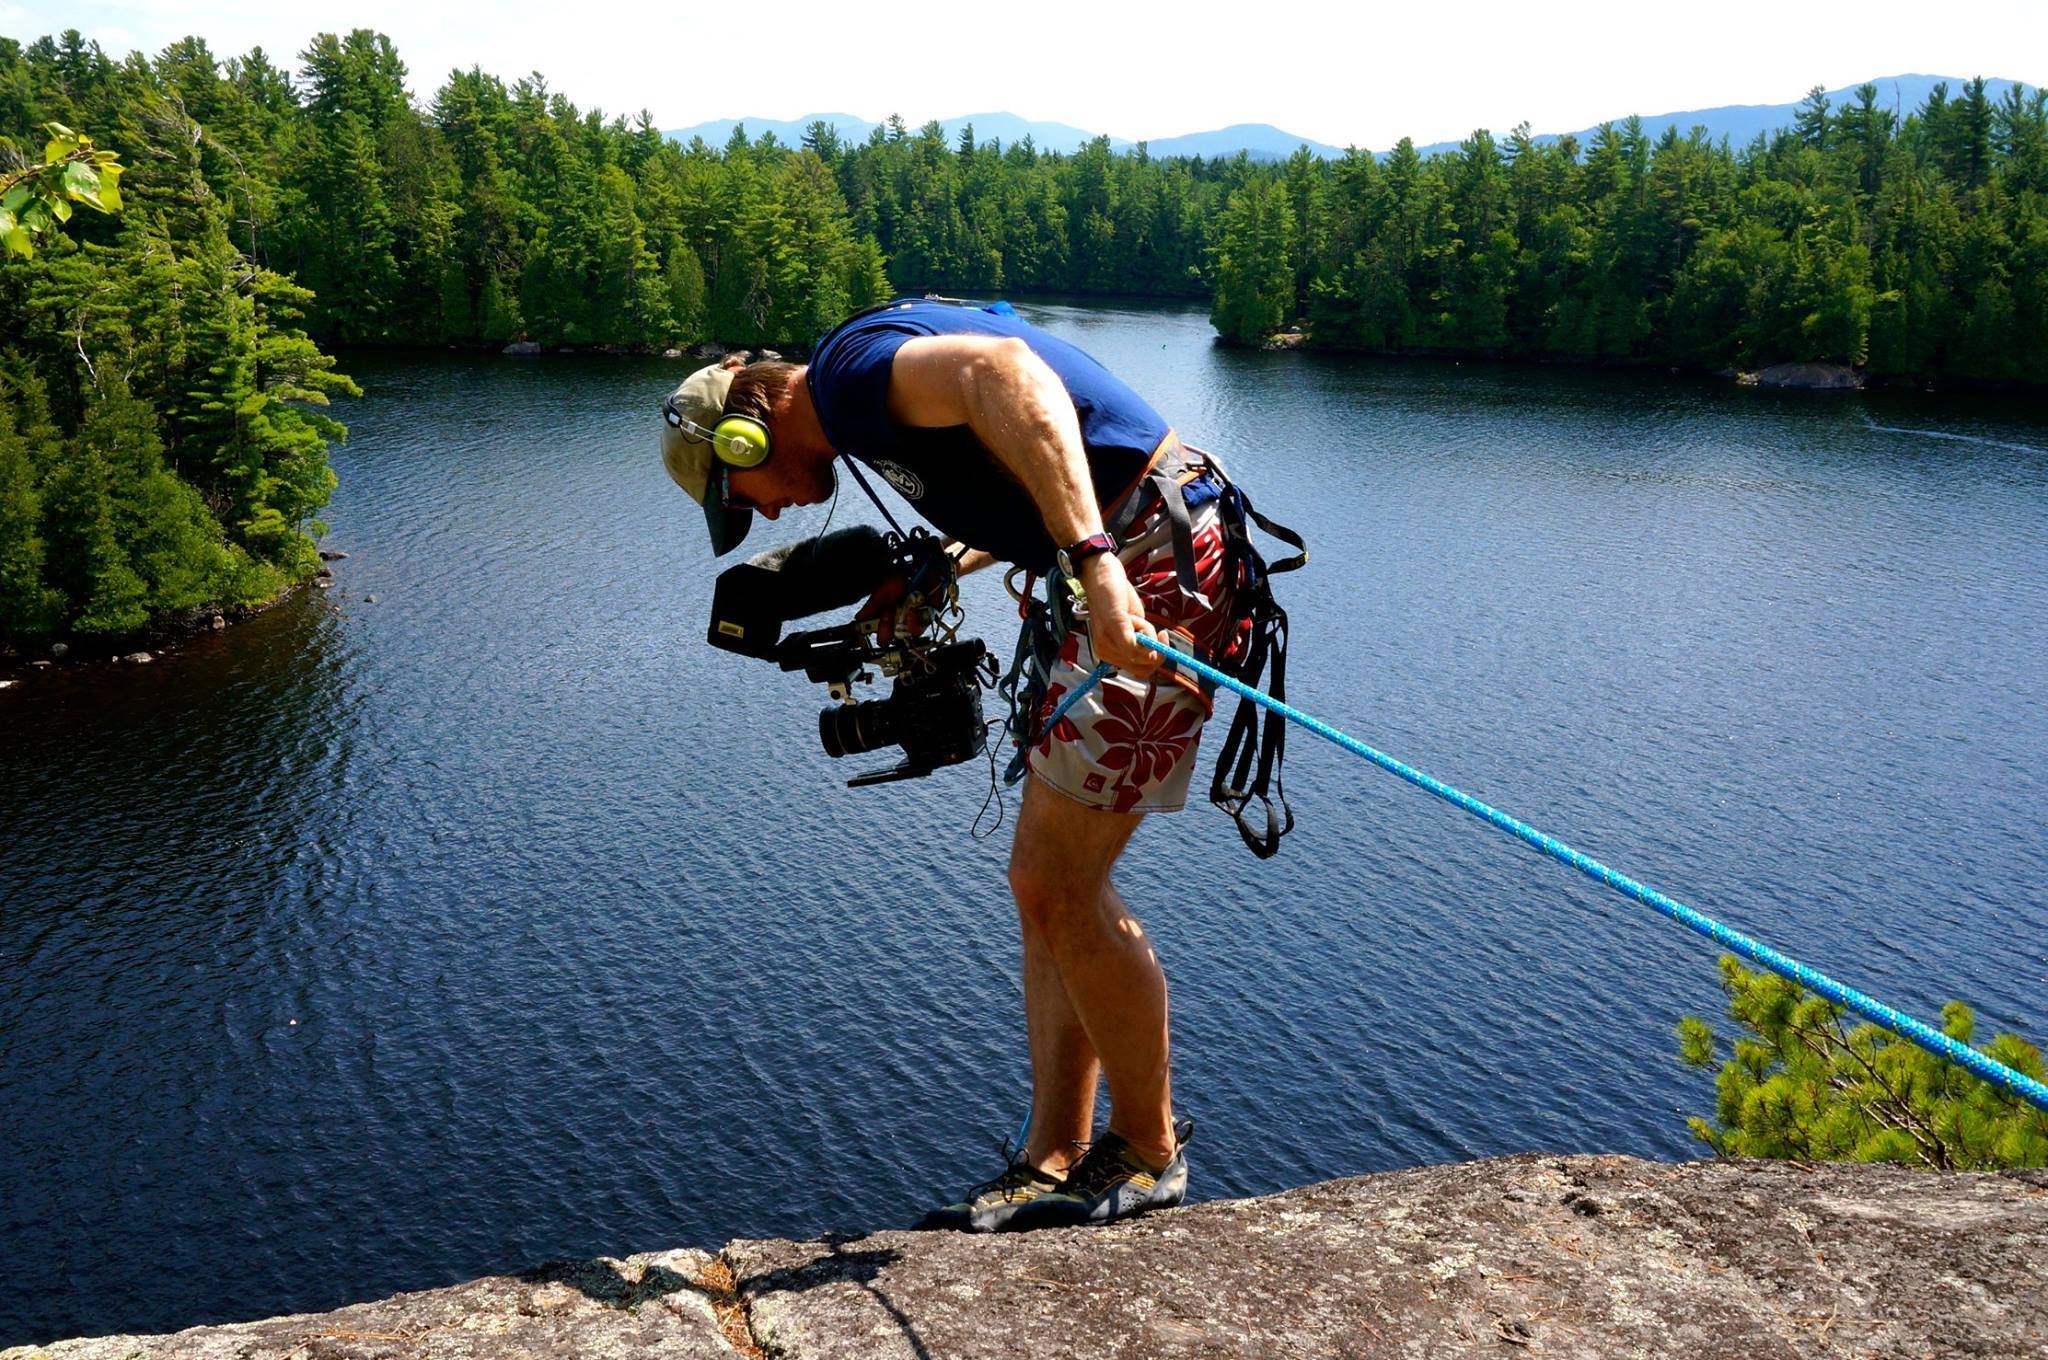 Producer/Editor/DP Rufus Lusk hangs off a cliff in the Adirondack's to capture a camper rock climbing.